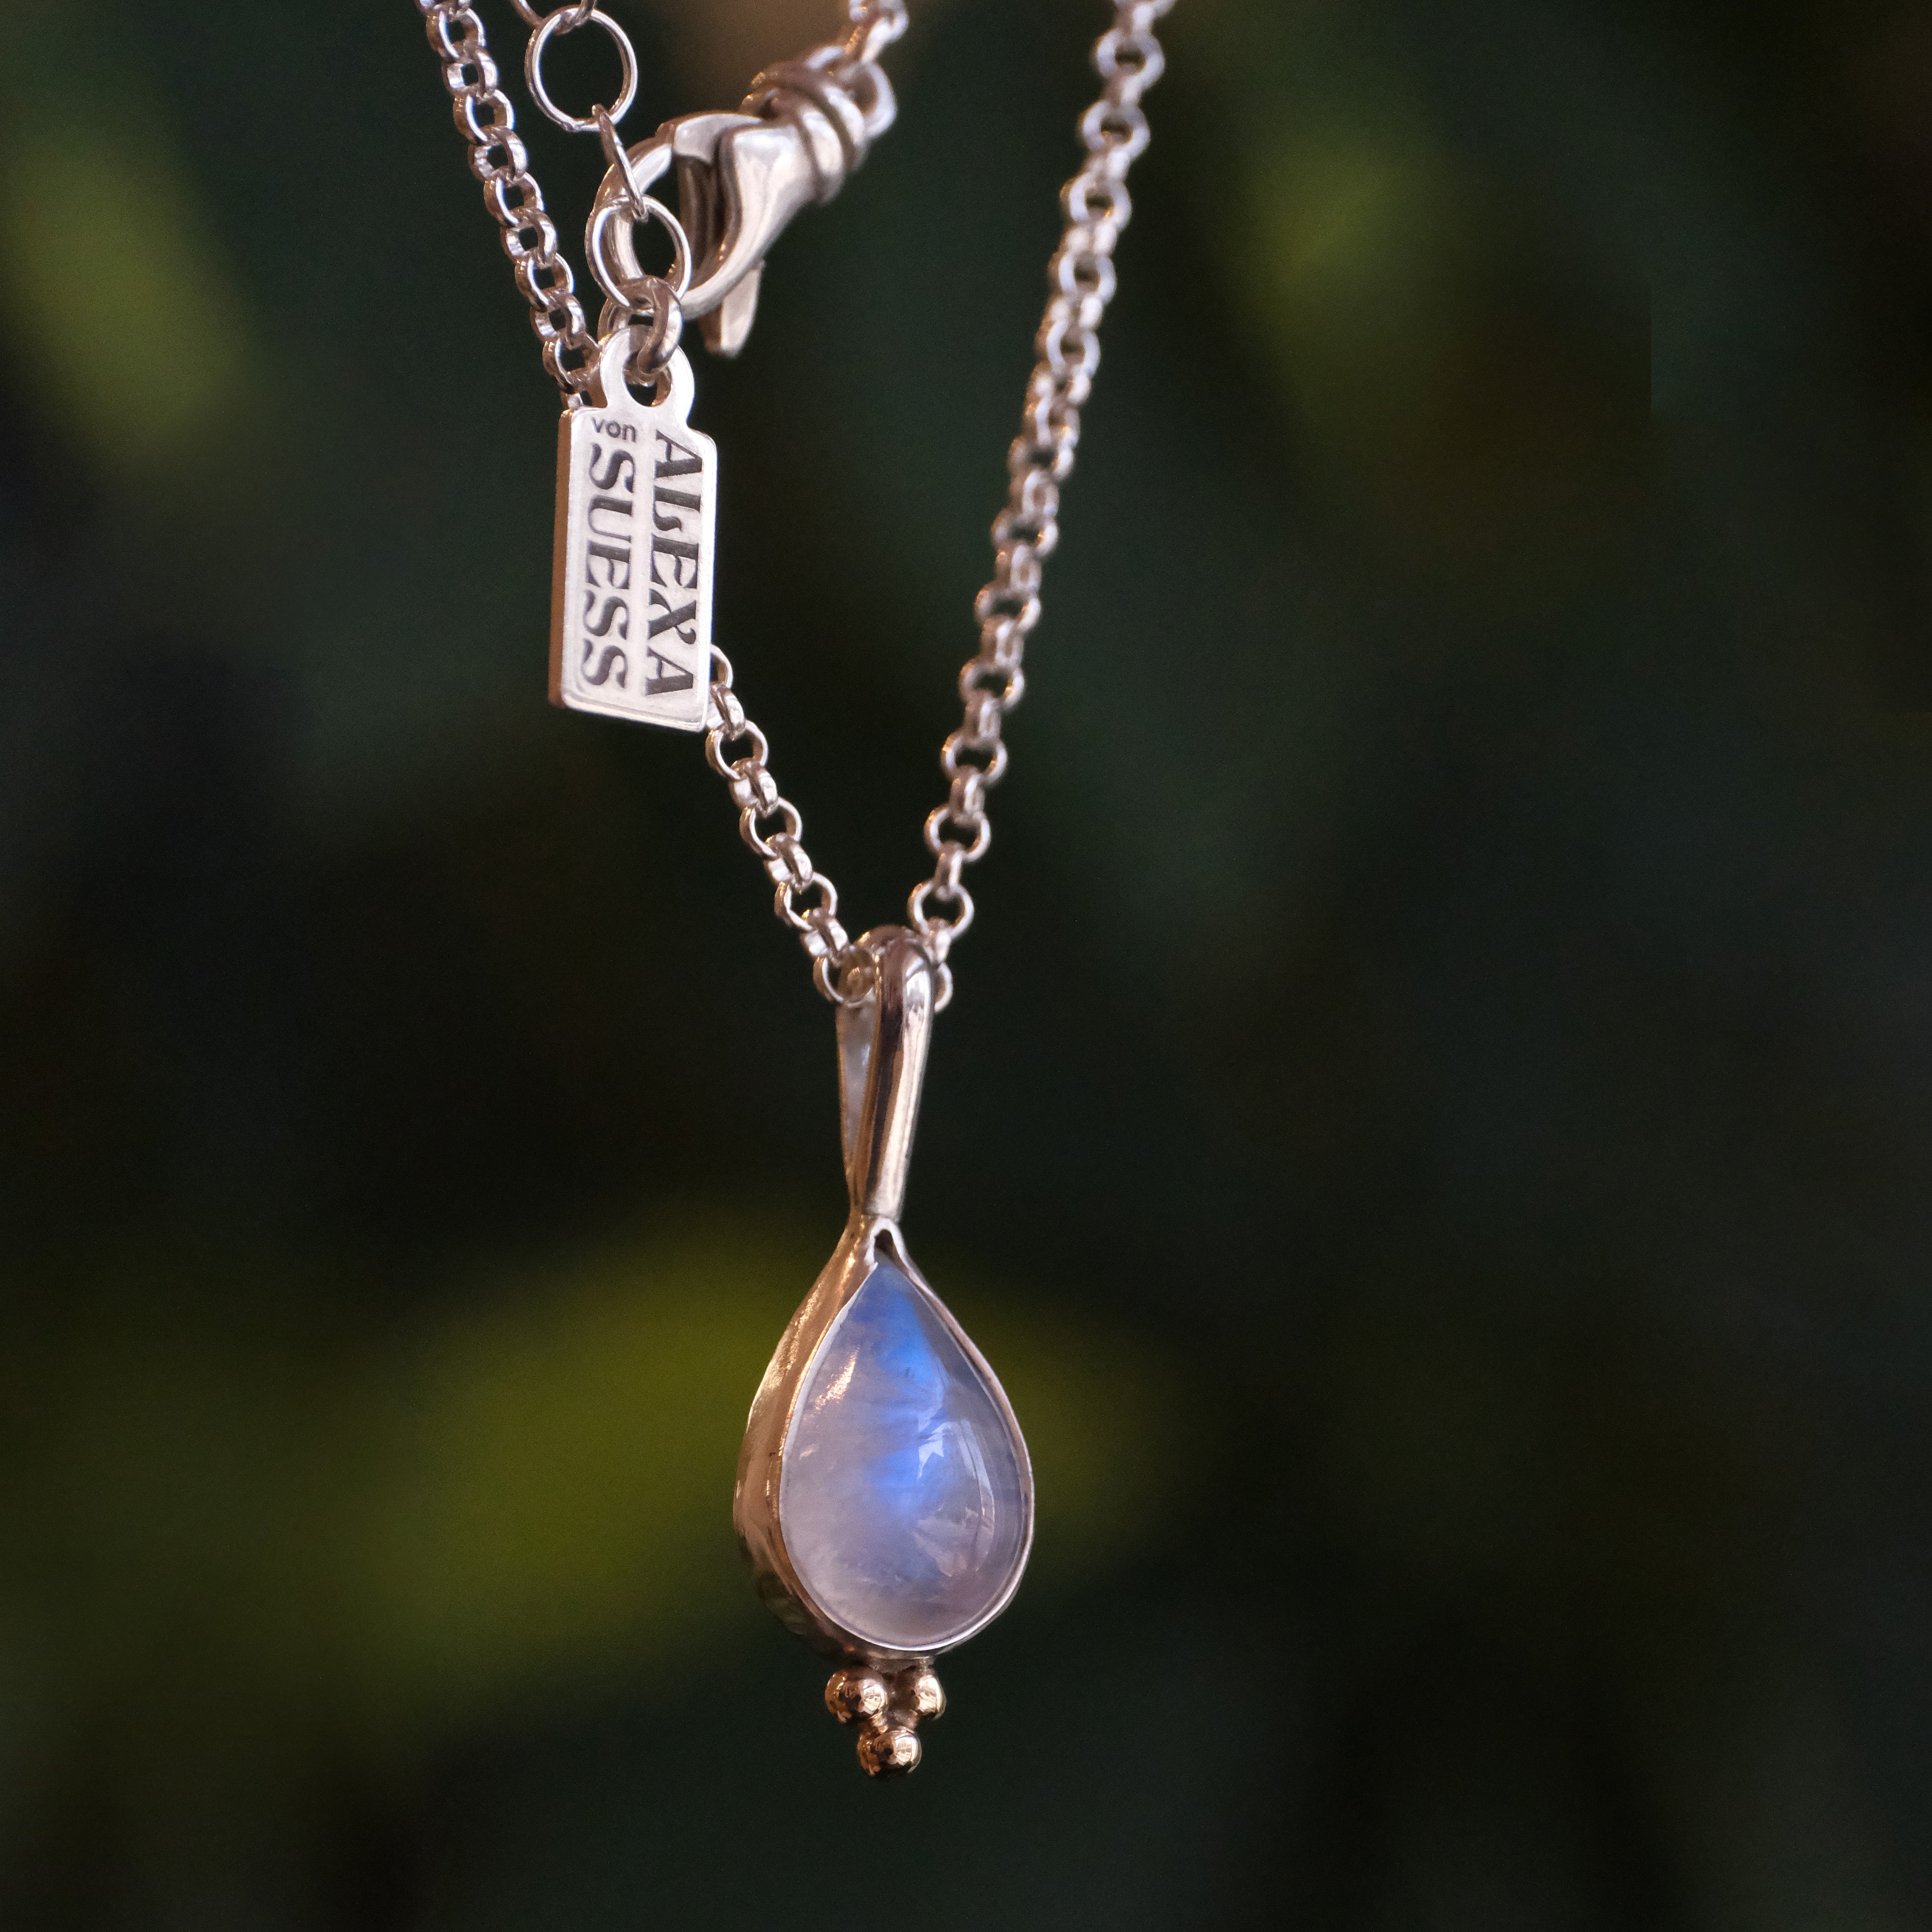 Moonstone Dewdrop Necklace - One of a Kind